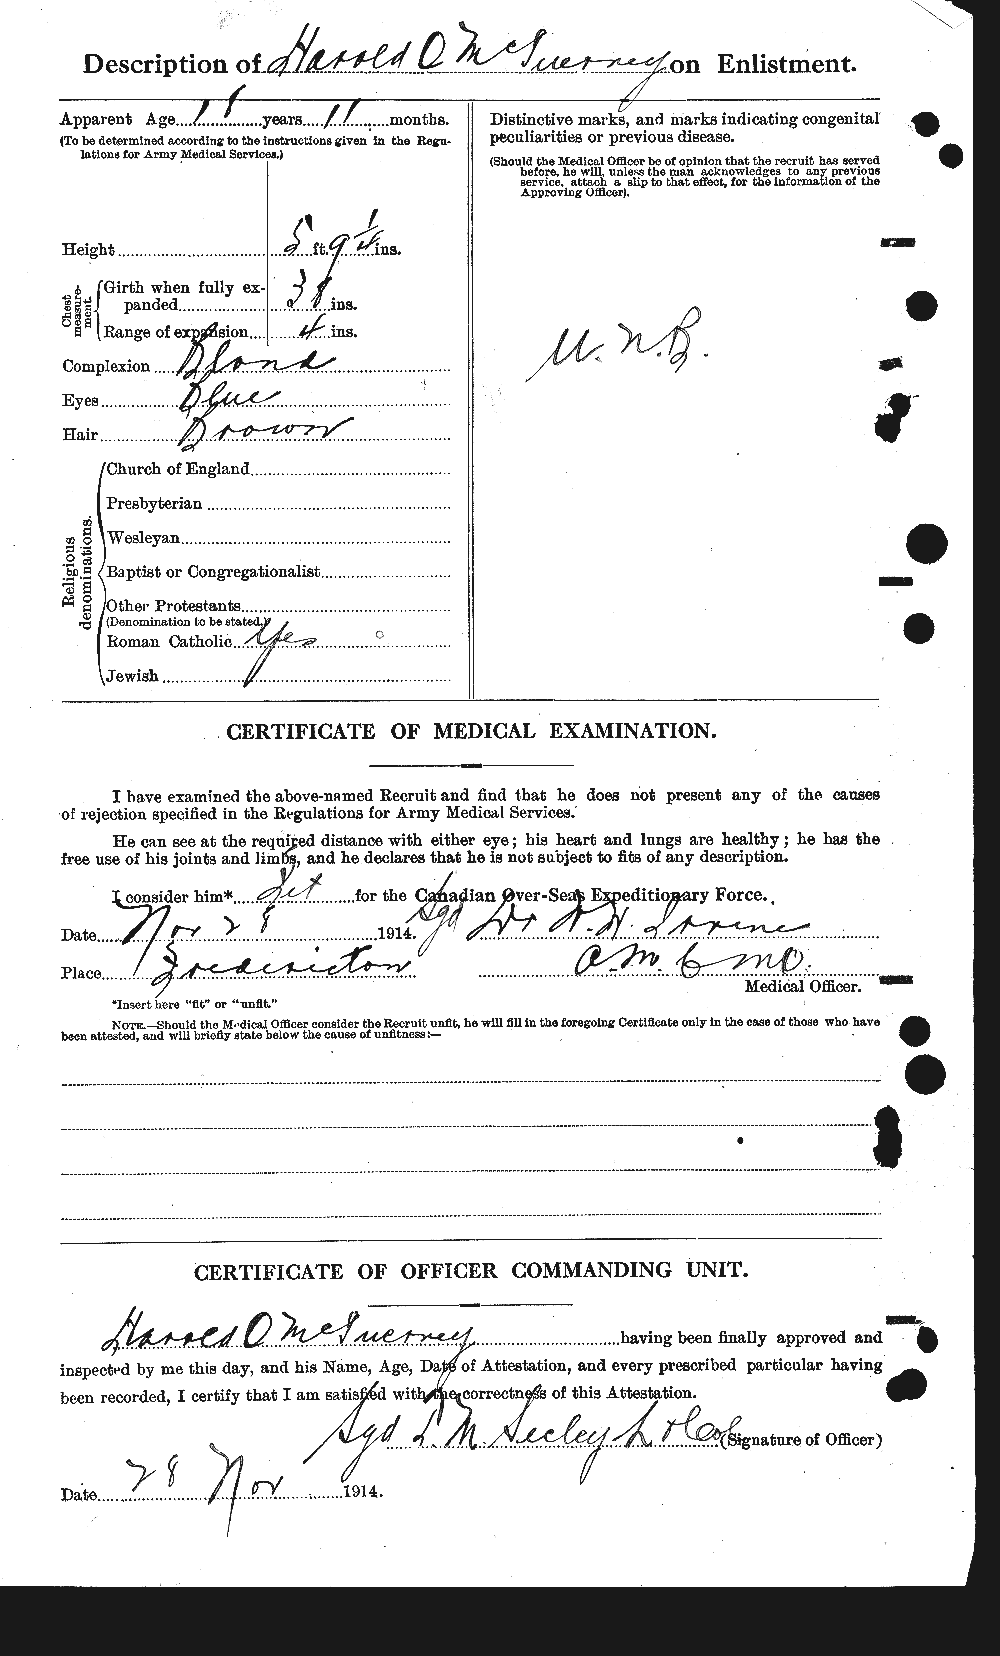 Personnel Records of the First World War - CEF 526577b